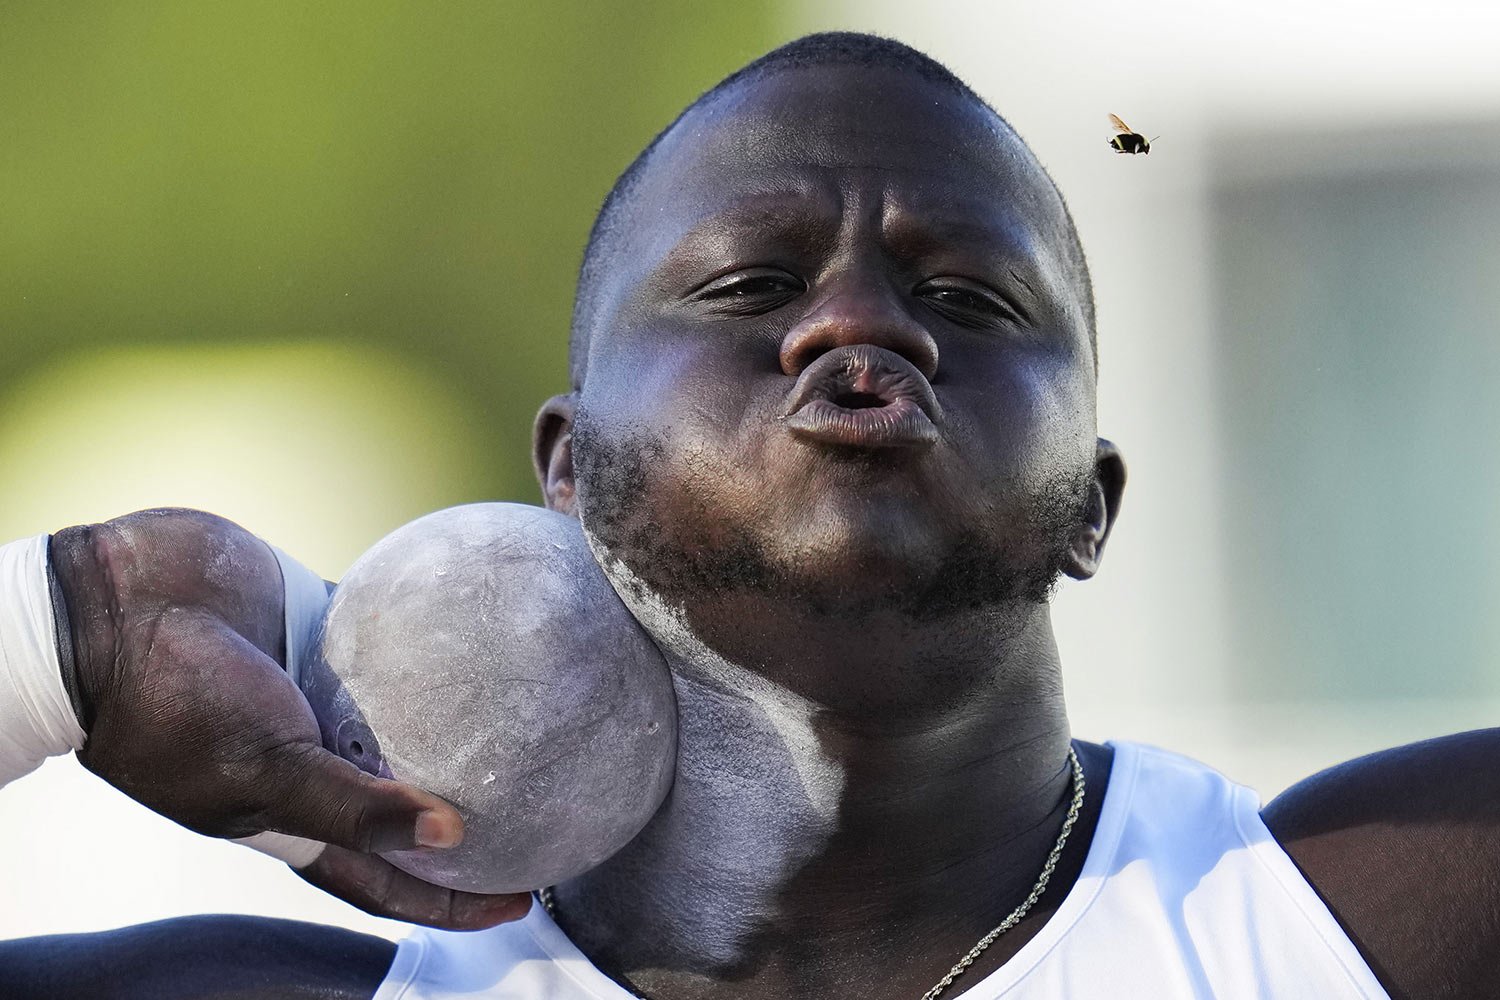  Josh Awotunde blows away an insect as he competes in the men's shot put during the U.S. track and field championships in Eugene, Ore., July 9, 2023. (AP Photo/Ashley Landis) 